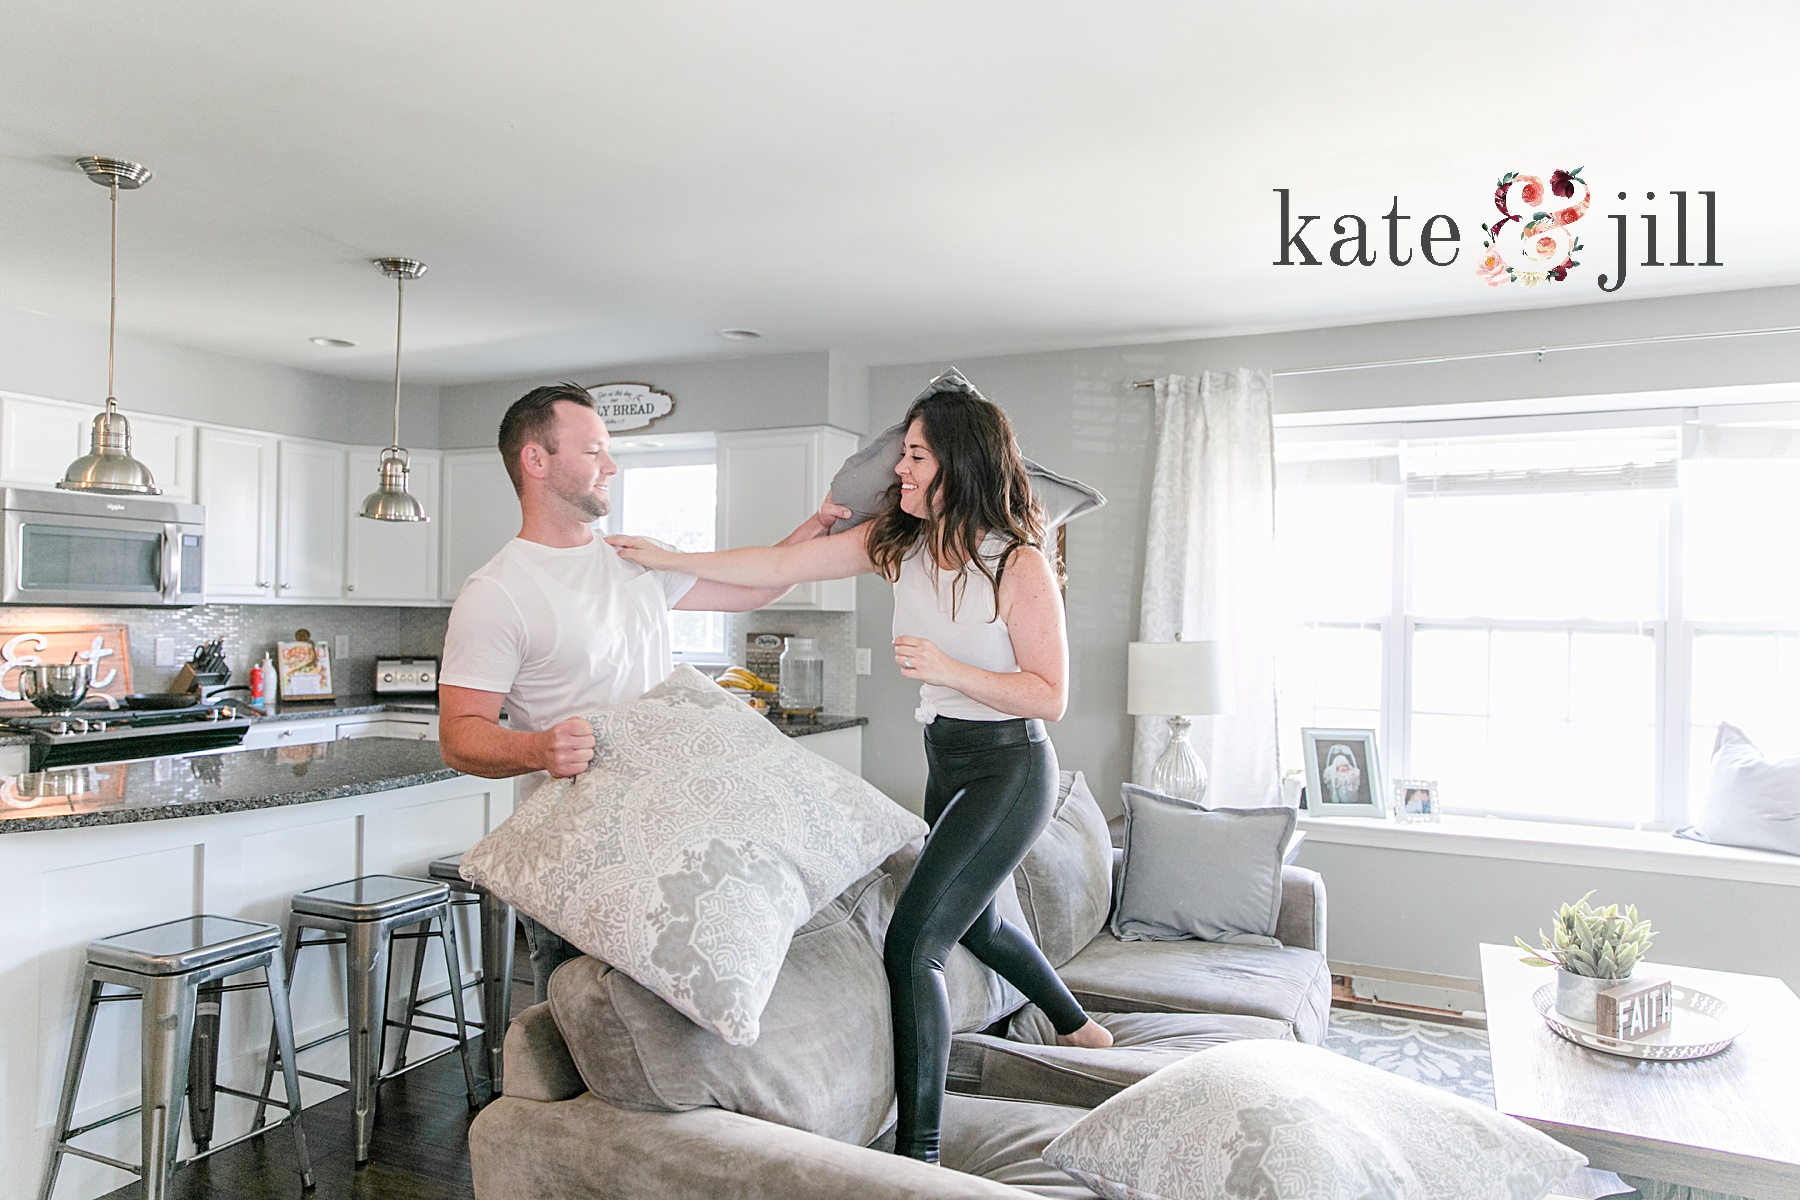 couple having a pillow fight